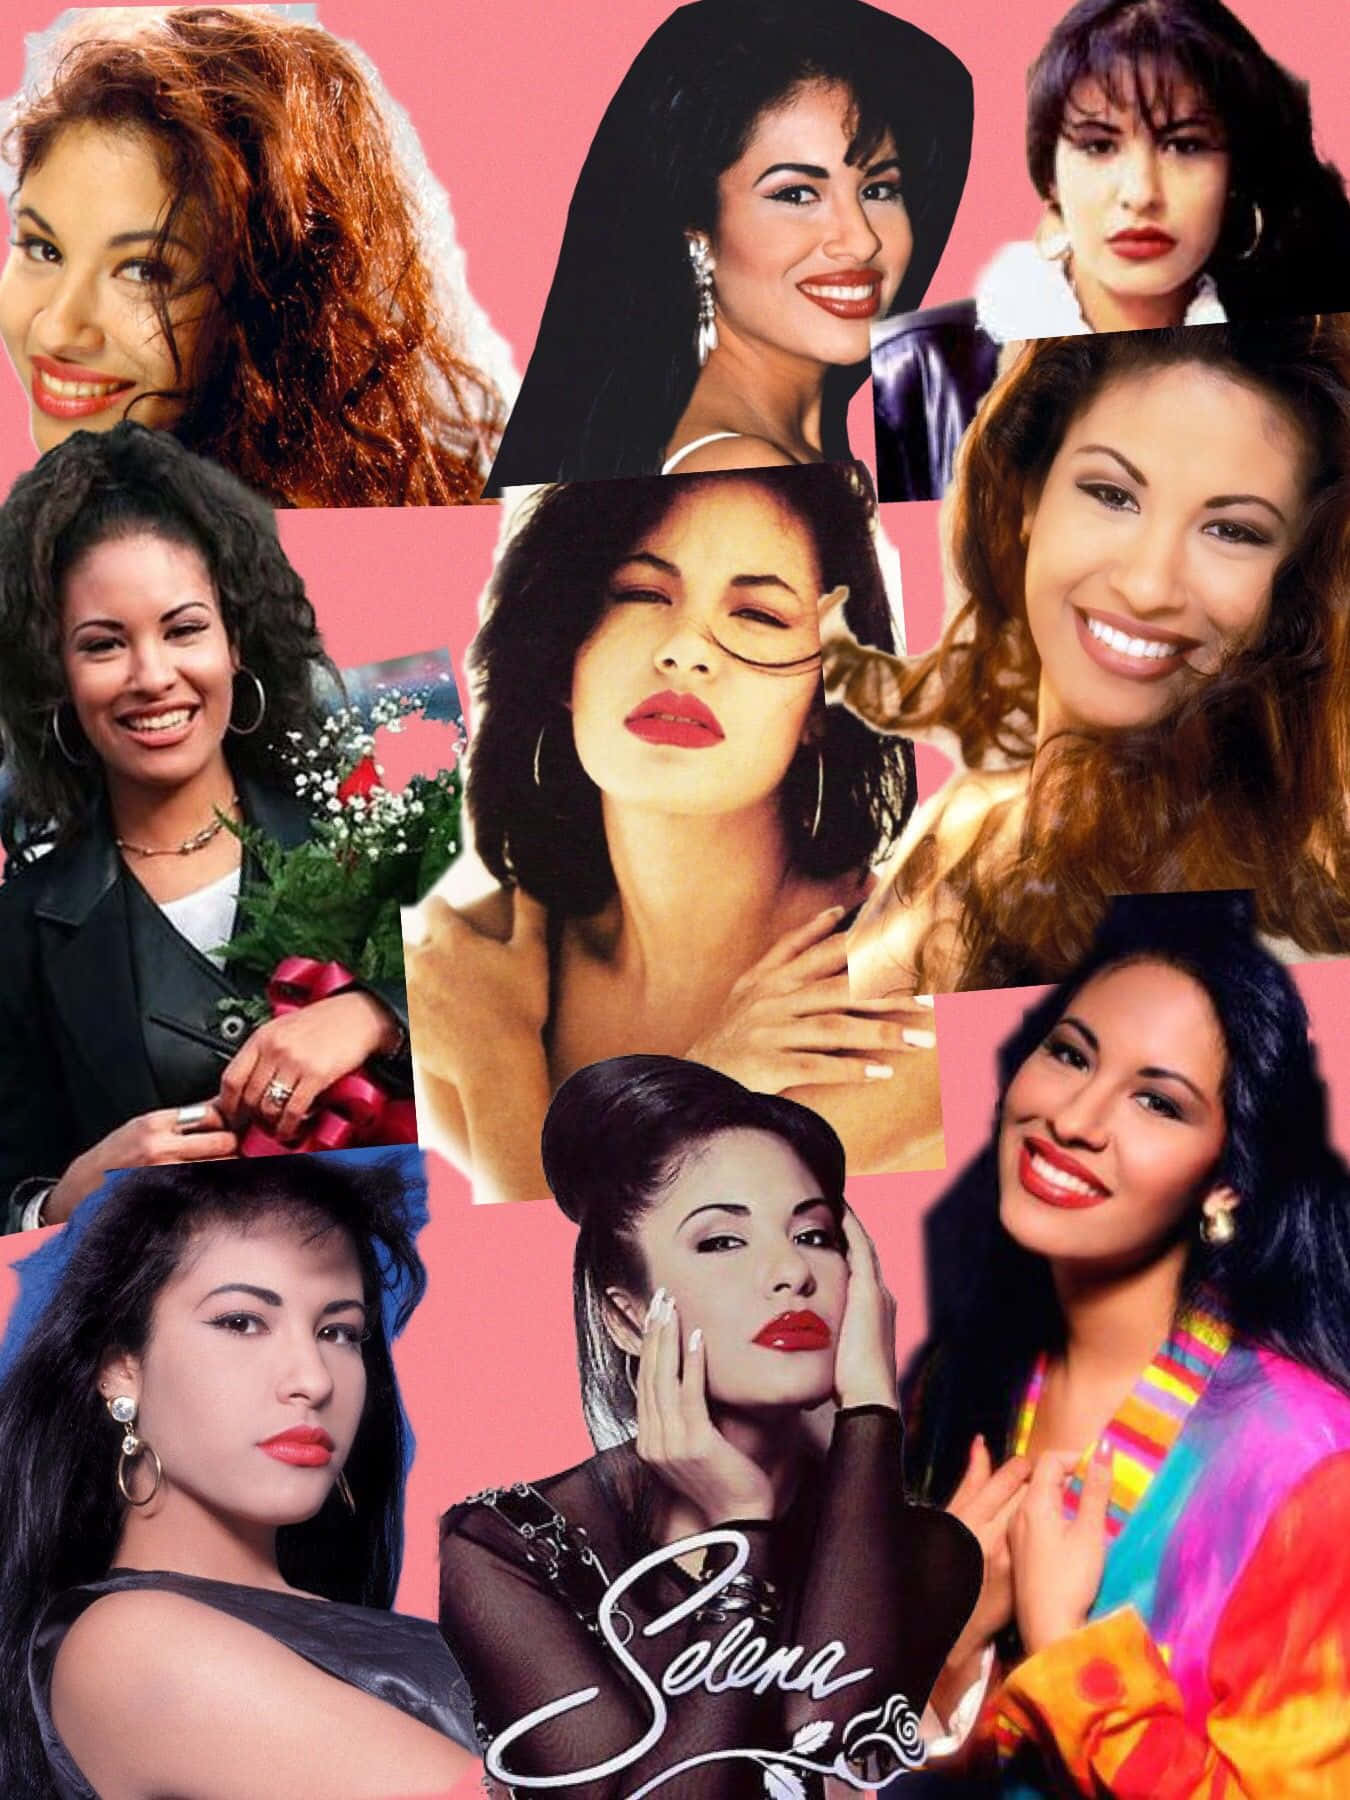 Celebrate the legacy of Selena Quintanilla with this new iPhone wallpaper Wallpaper